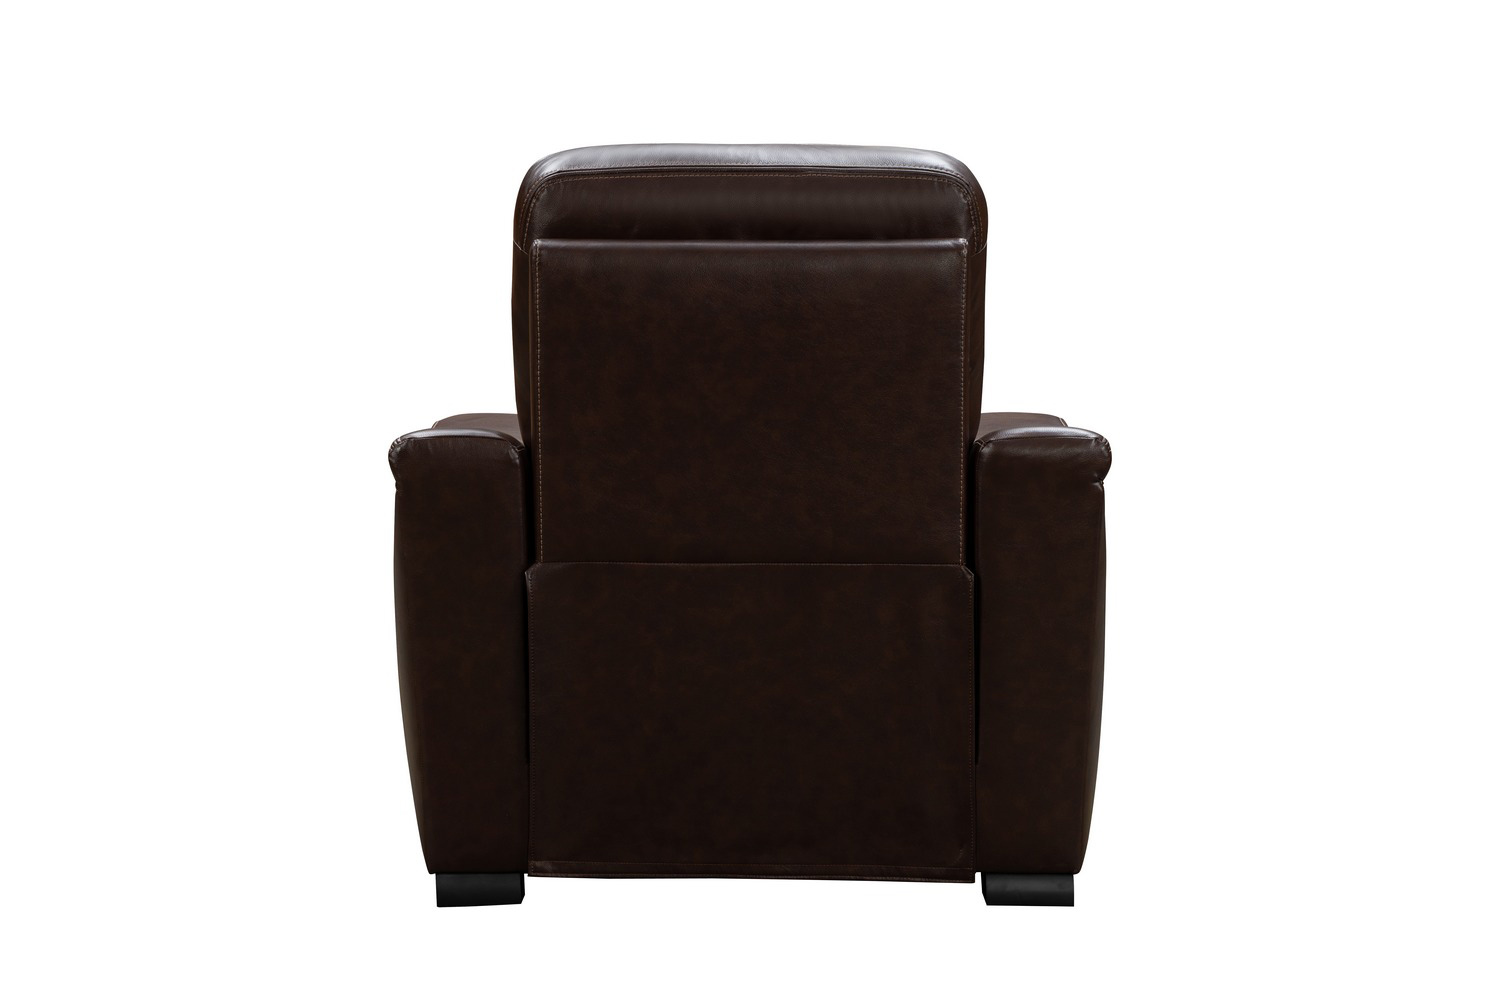 Barcalounger Electra Power Recliner Chair with Power Head Rest and Power Lumbar - Castleton Rustic Brown/Leather Match